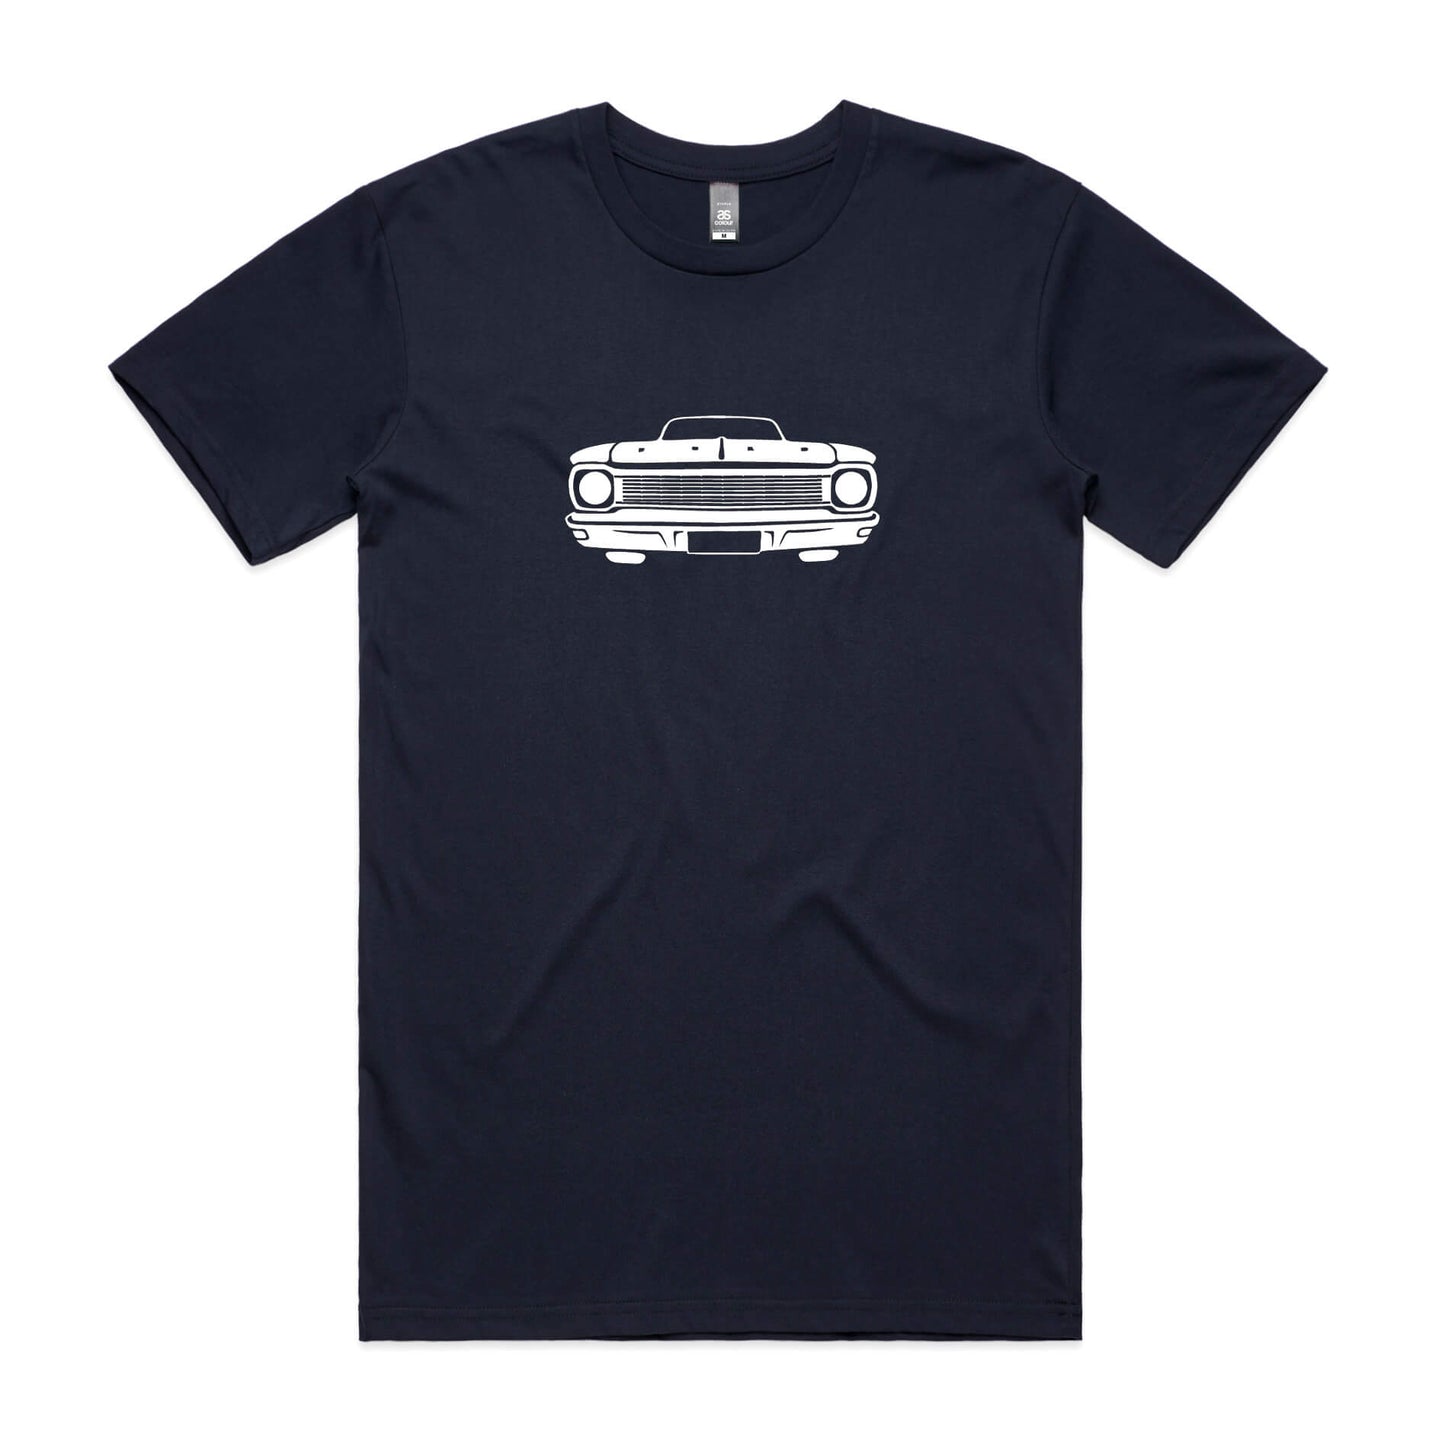 Ford XP Falcon t-shirt in navy blue